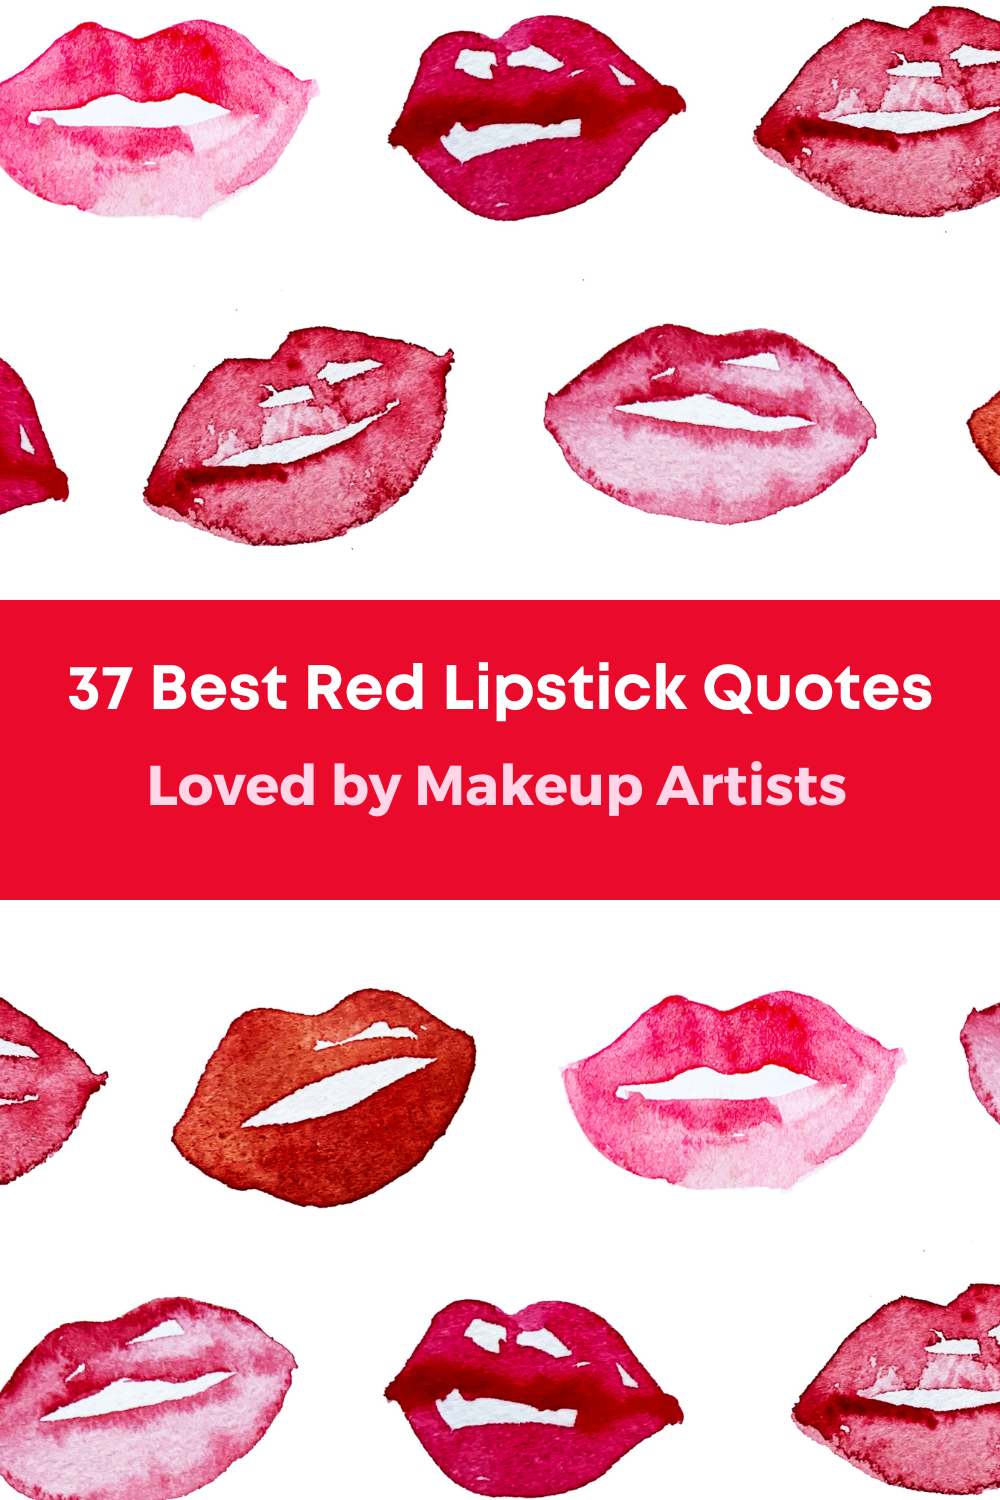 Makeup-Artist-Red-Lipstick-Quotes